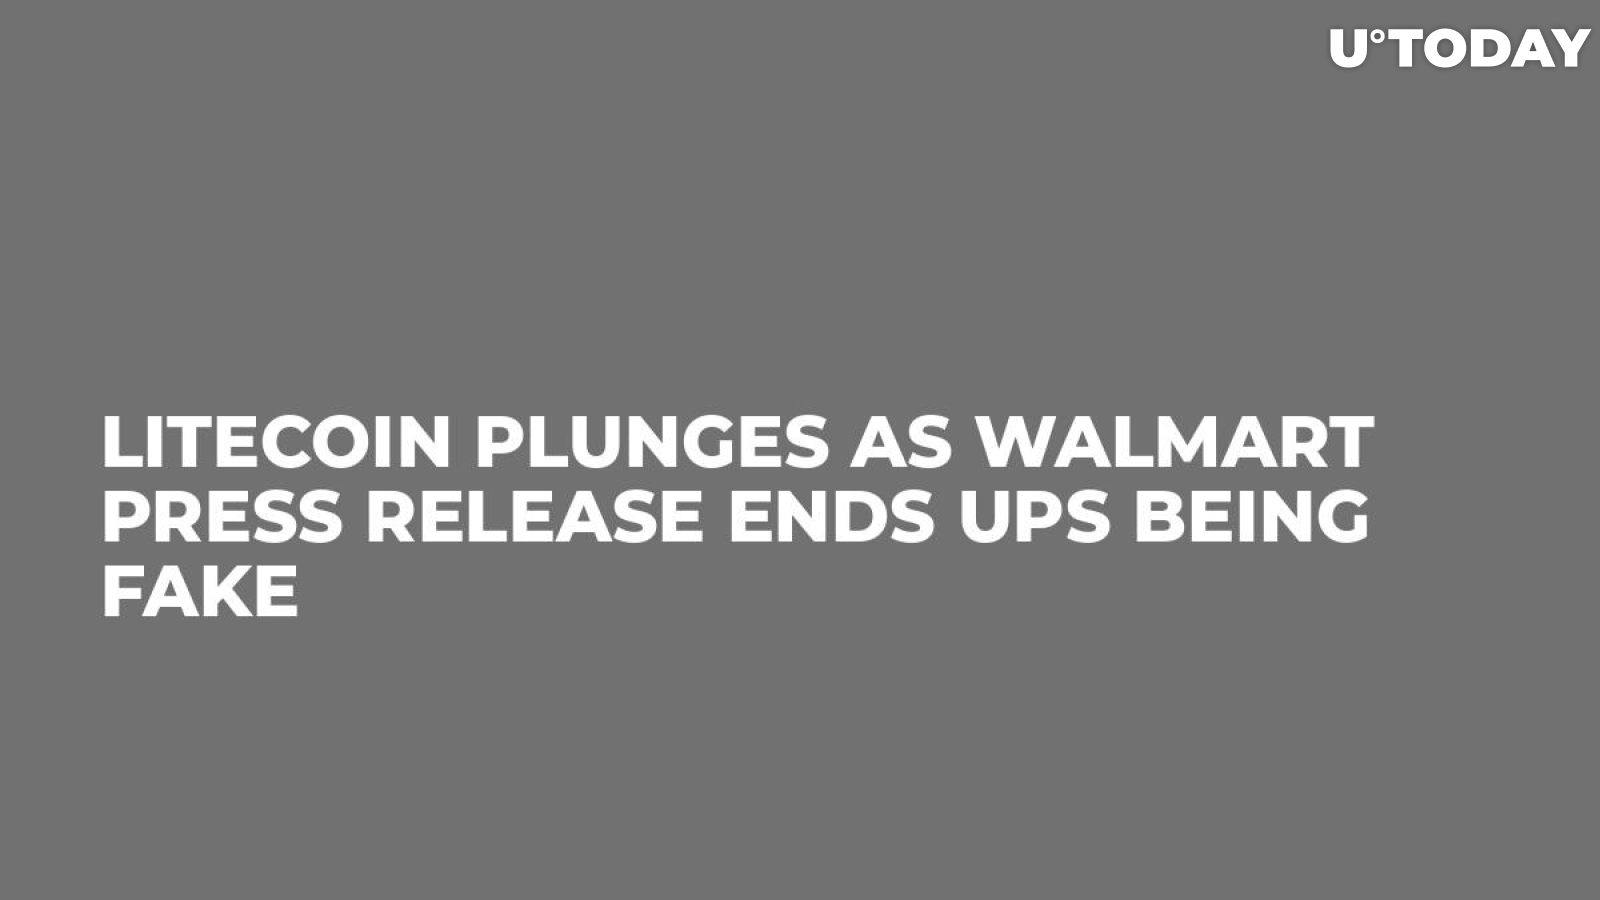 Litecoin Plunges as Walmart Press Release Ends Ups Being Fake  